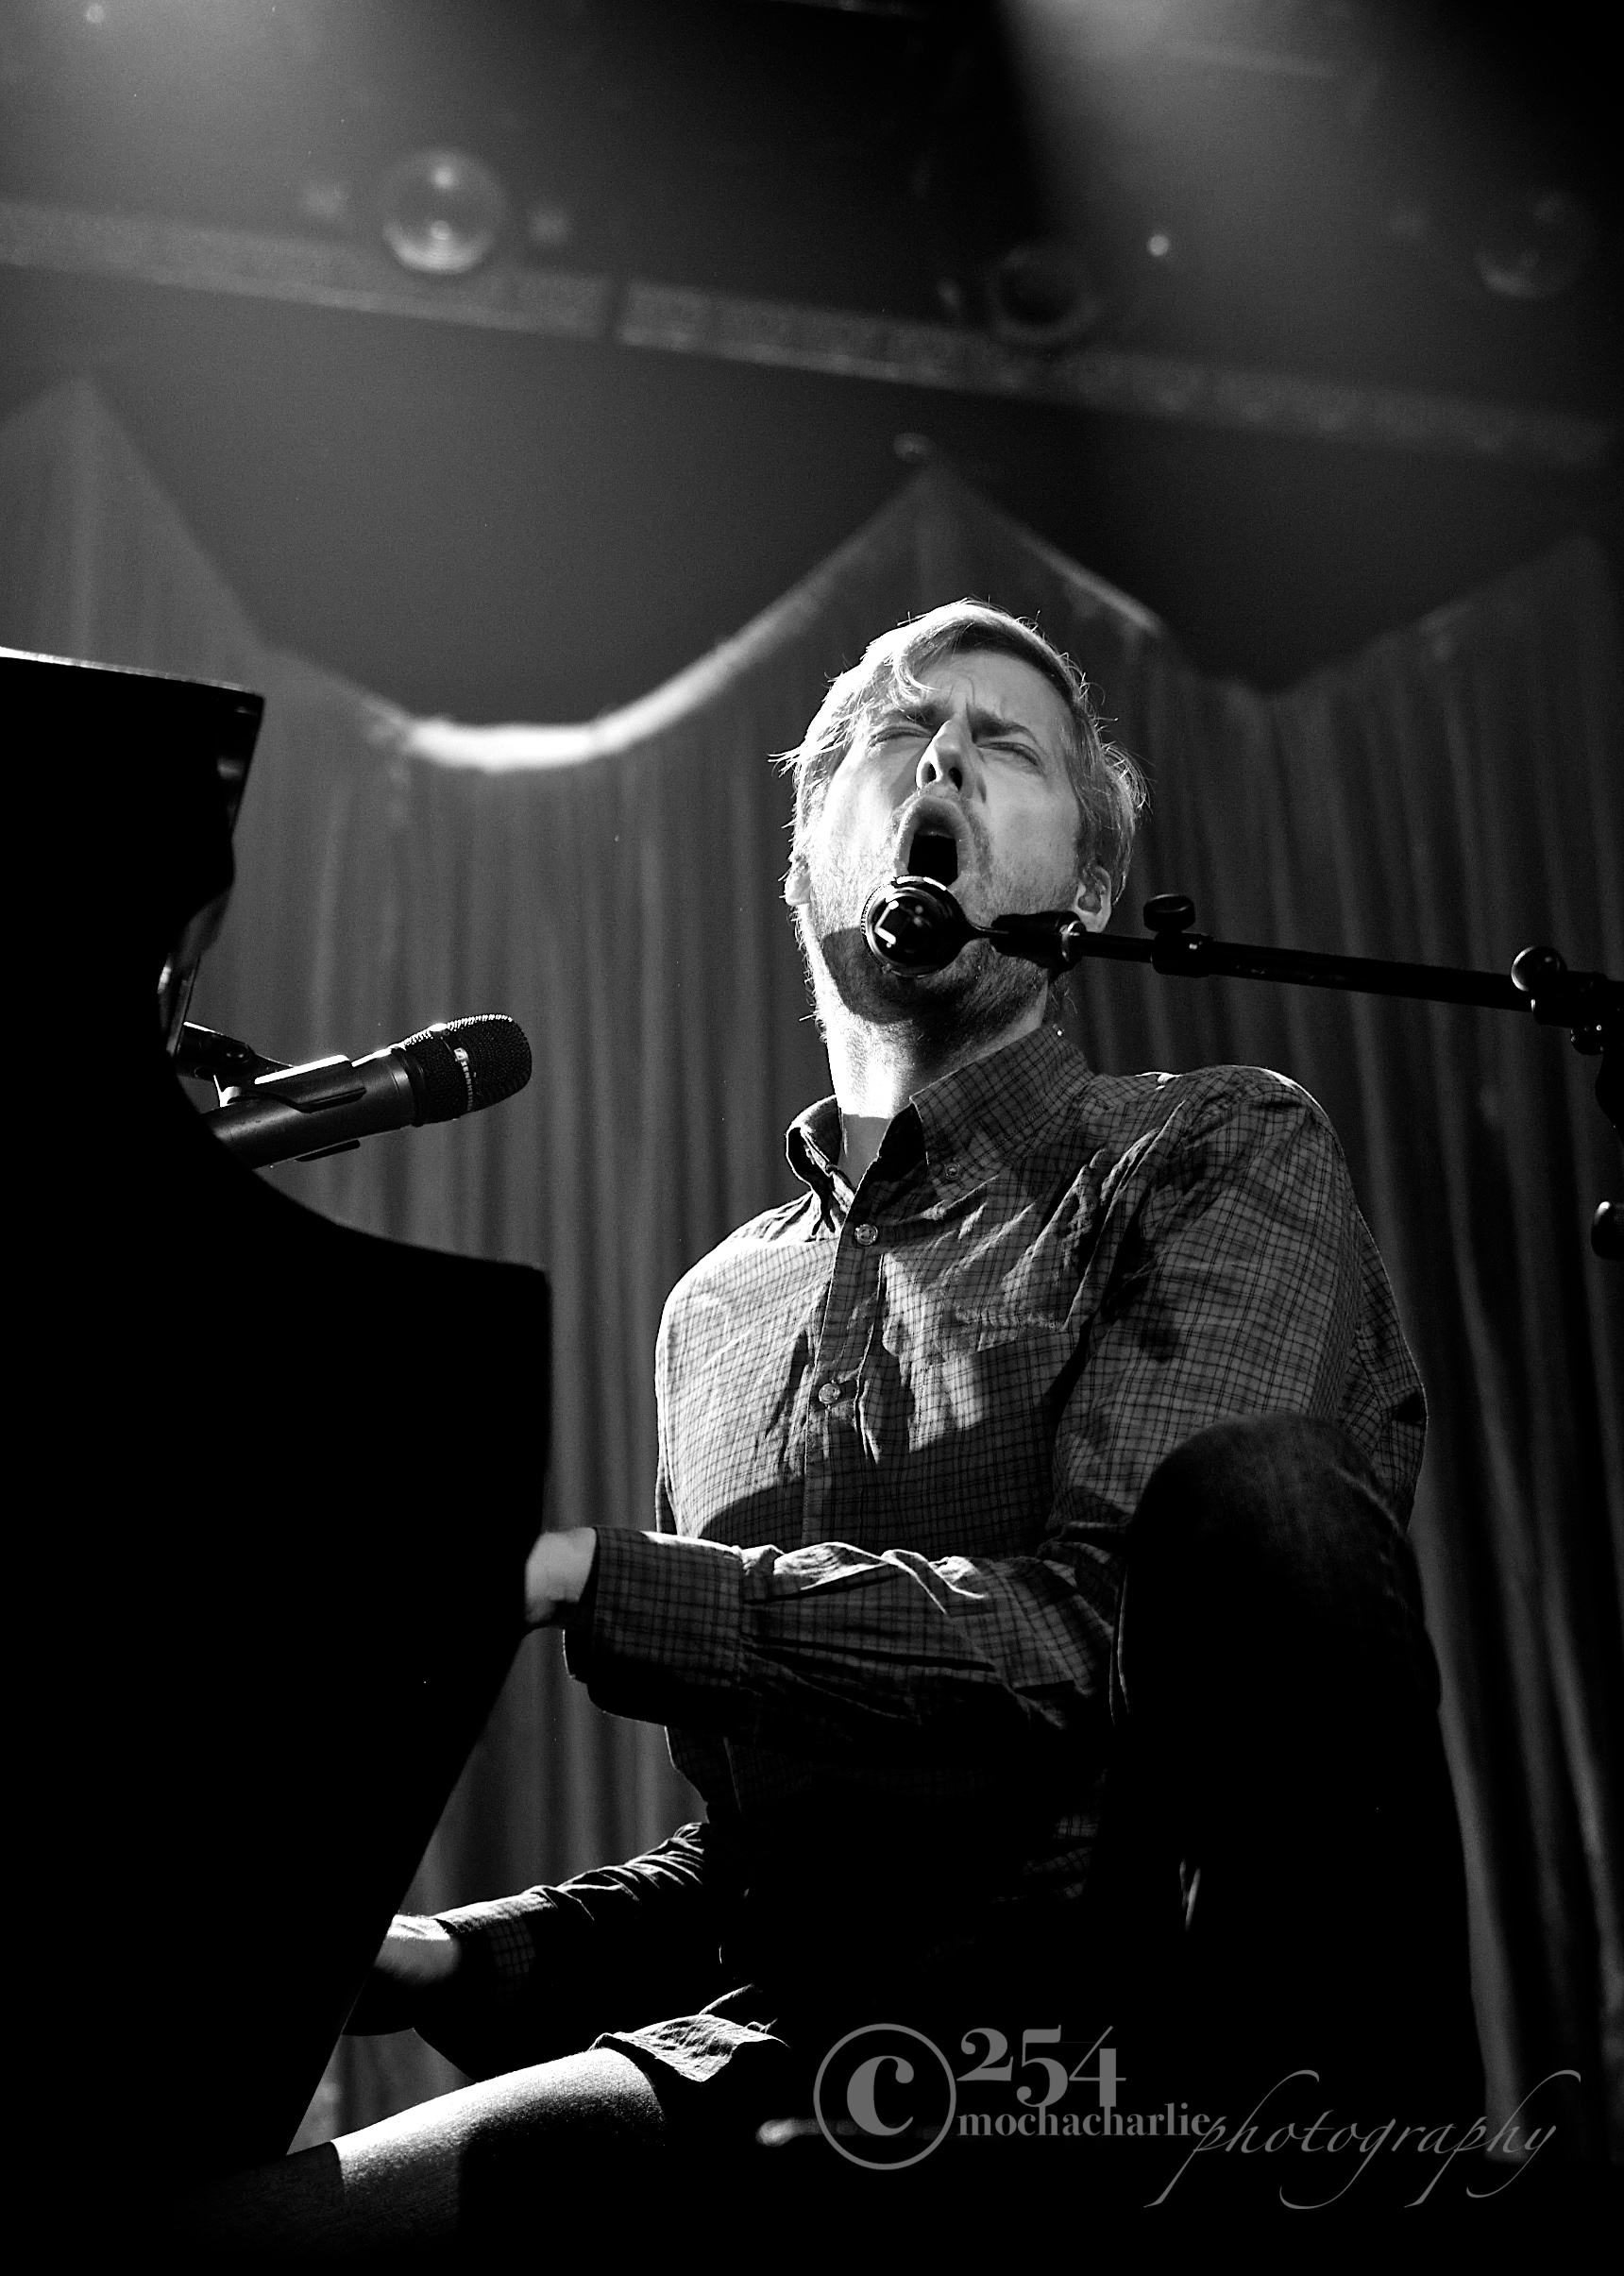 Andrew McMahon at The Neptune (Photo by Mocha Charlie)